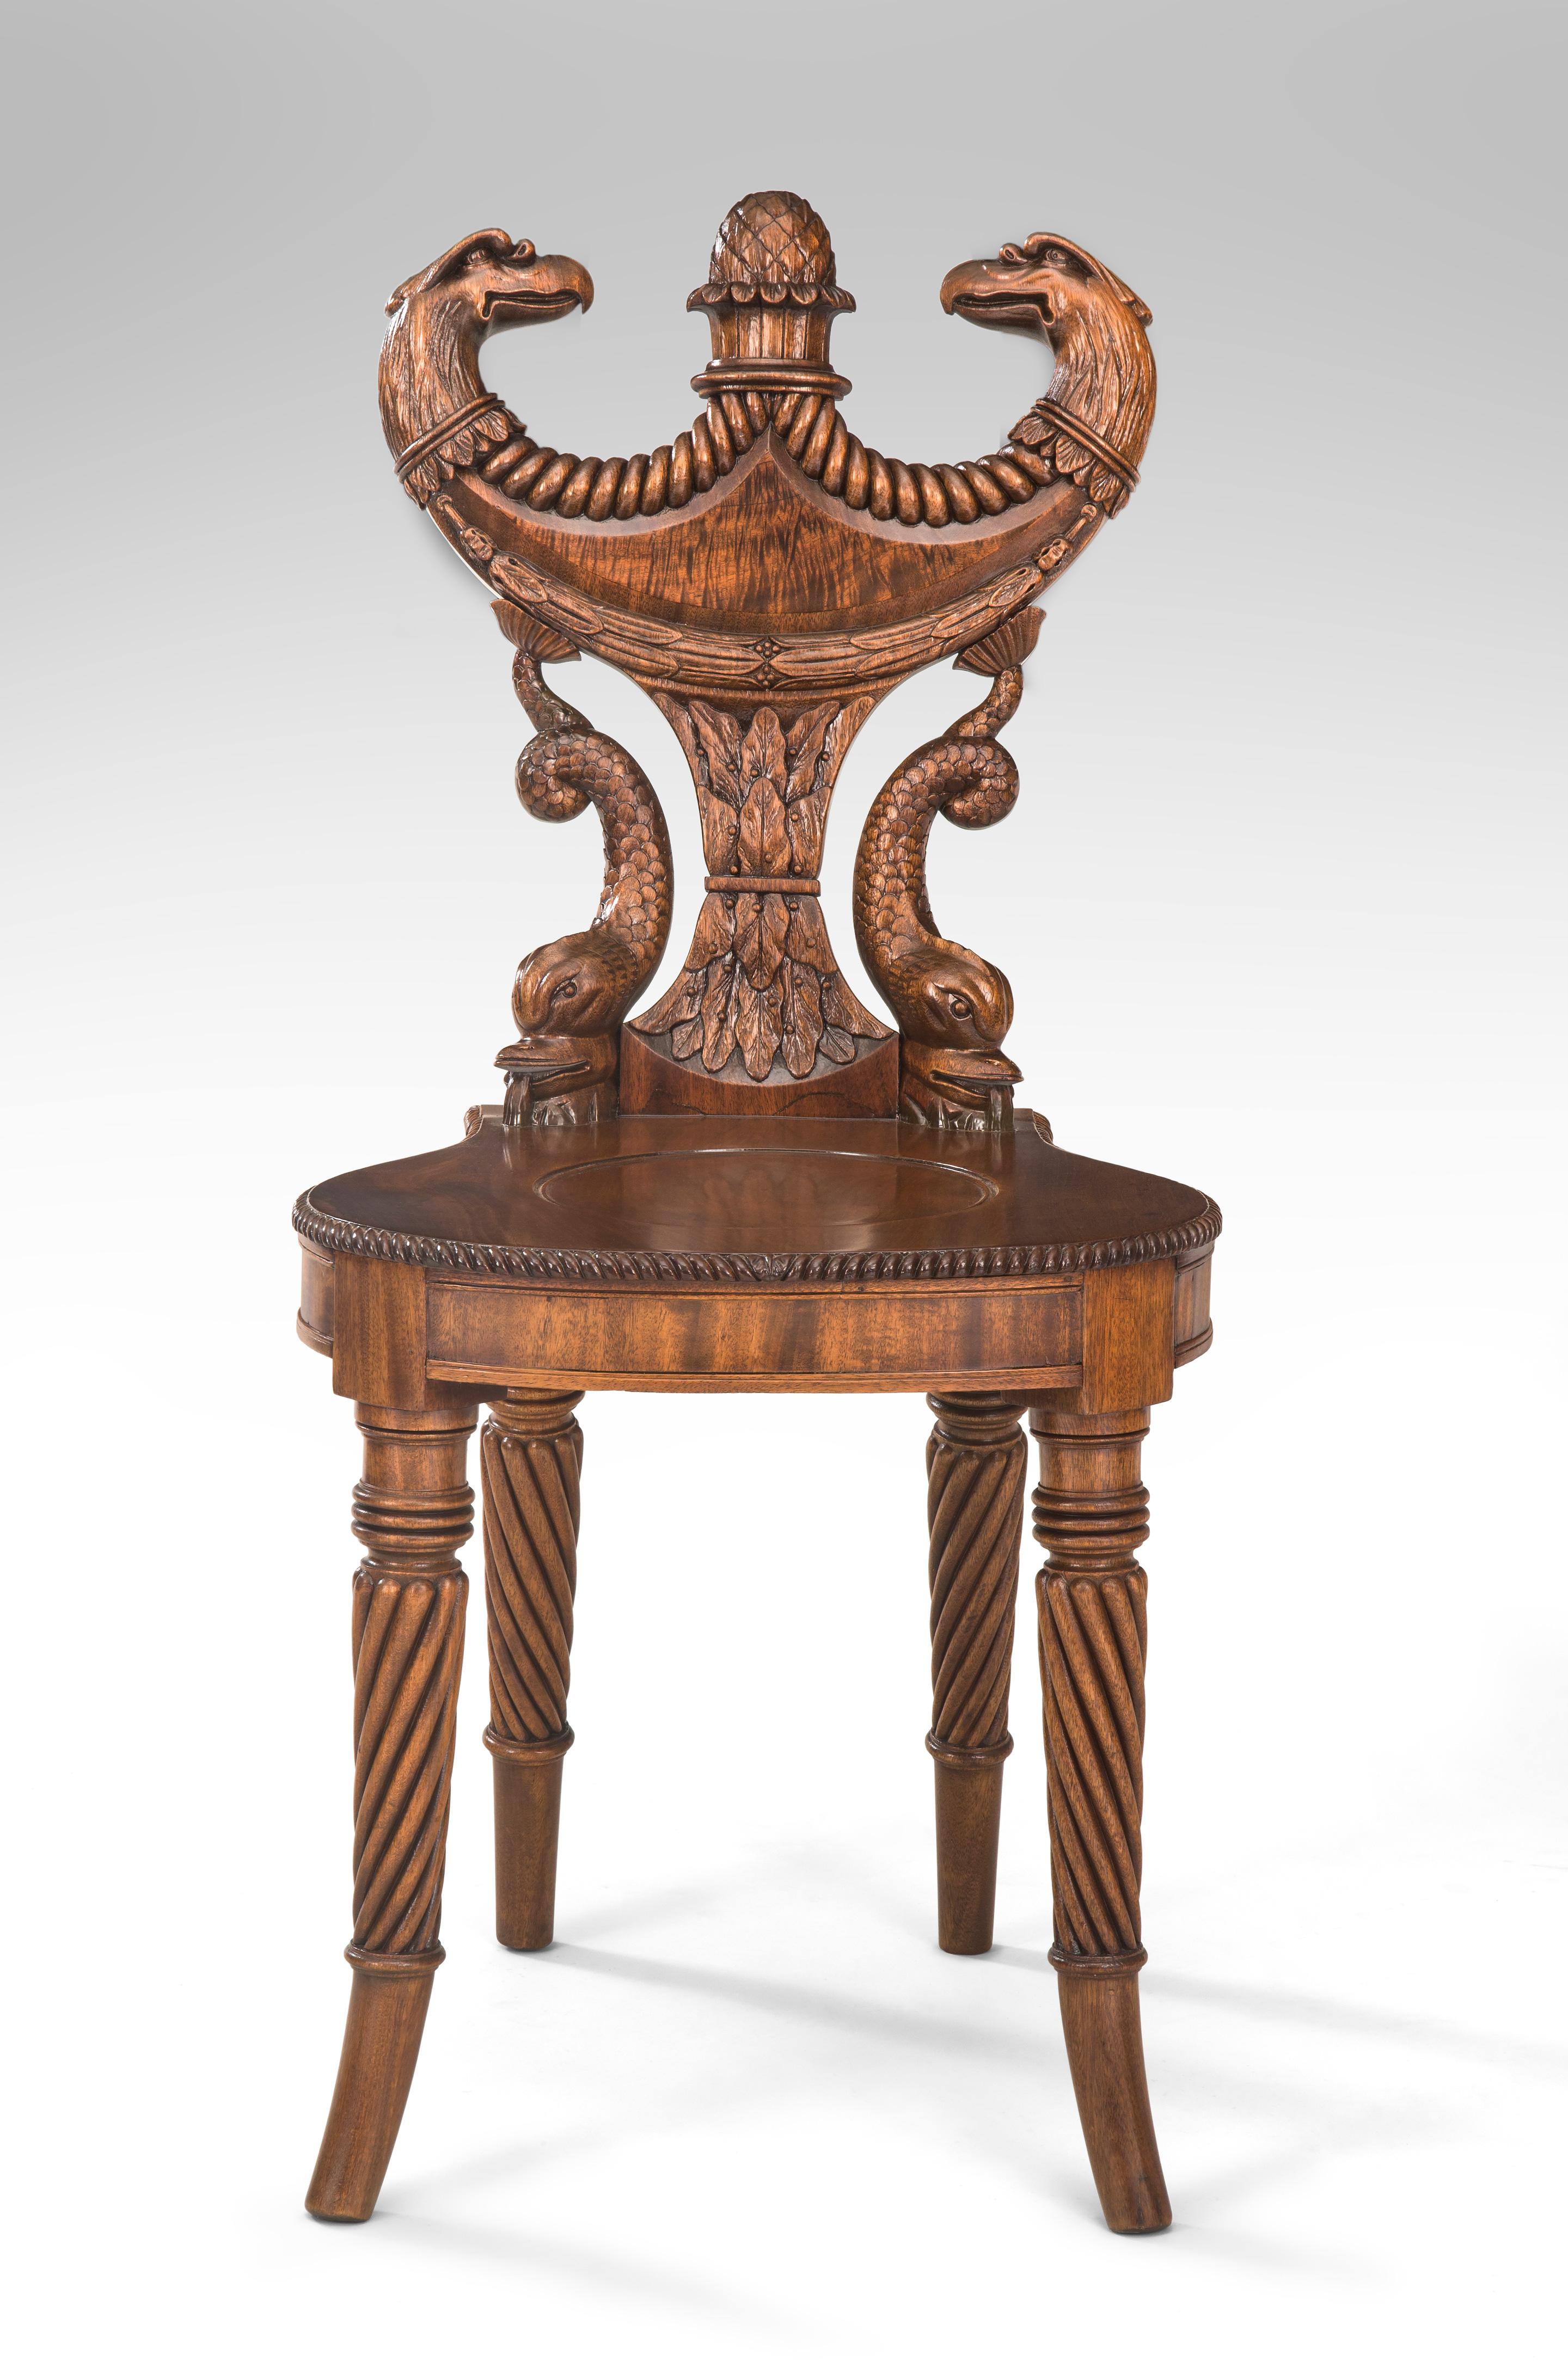 Outstanding English Regency mahogany hall chair
Late 18th or early 19th century
A highly original hall chair of ingenious design and superb carving, a rare and exceptional chair. The double headed eagle shield back supported by flanking dolphins,